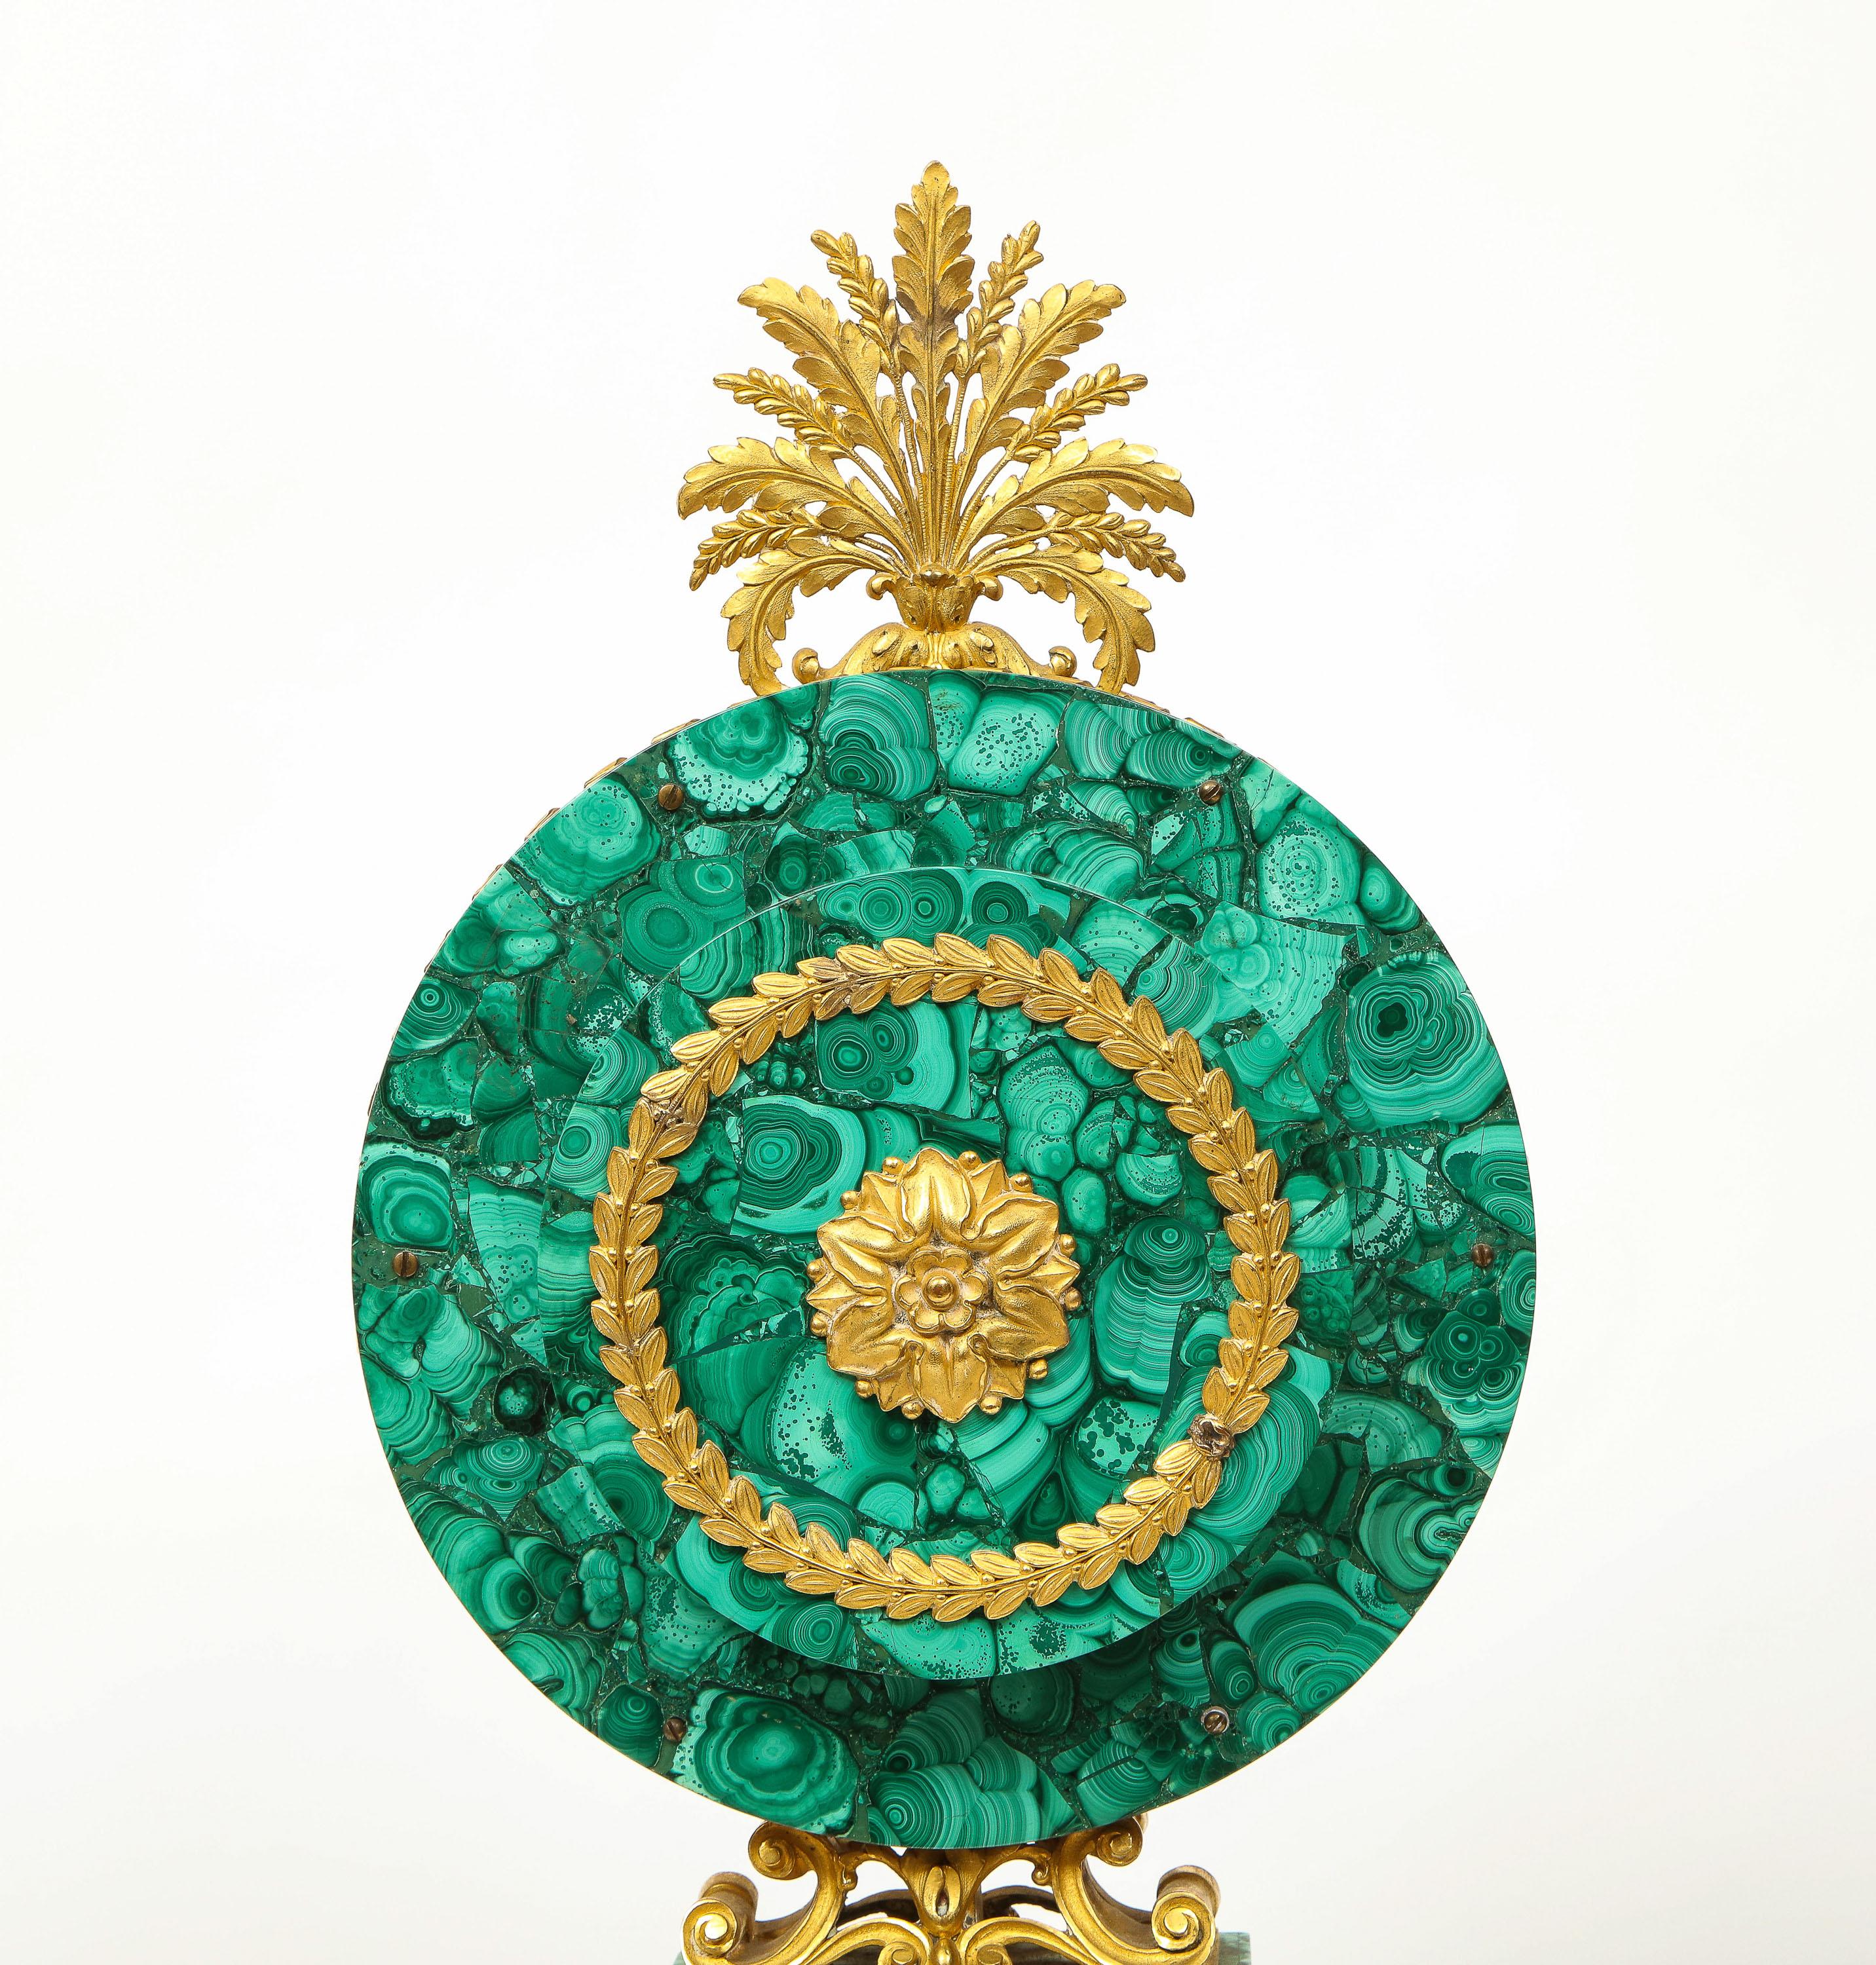 Edward F. Caldwell, An Extremely Fine and Rare Ormolu-Mounted Malachite Clock For Sale 4